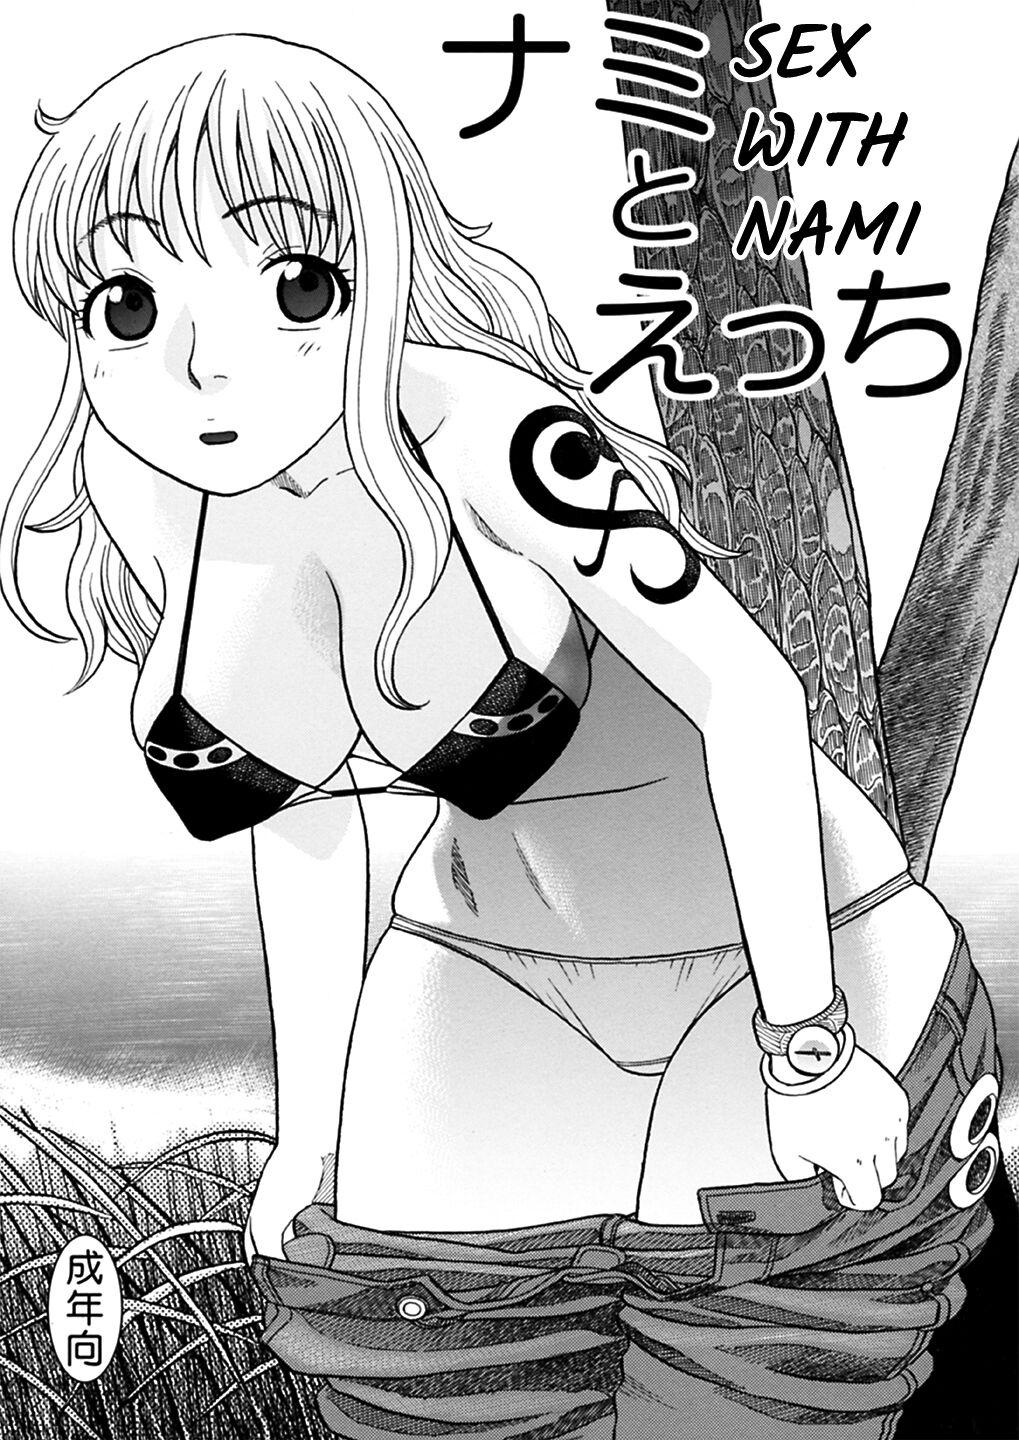 Red Head Nami to Ecchi | Sex with Nami - One piece Gay Hardcore - Page 1